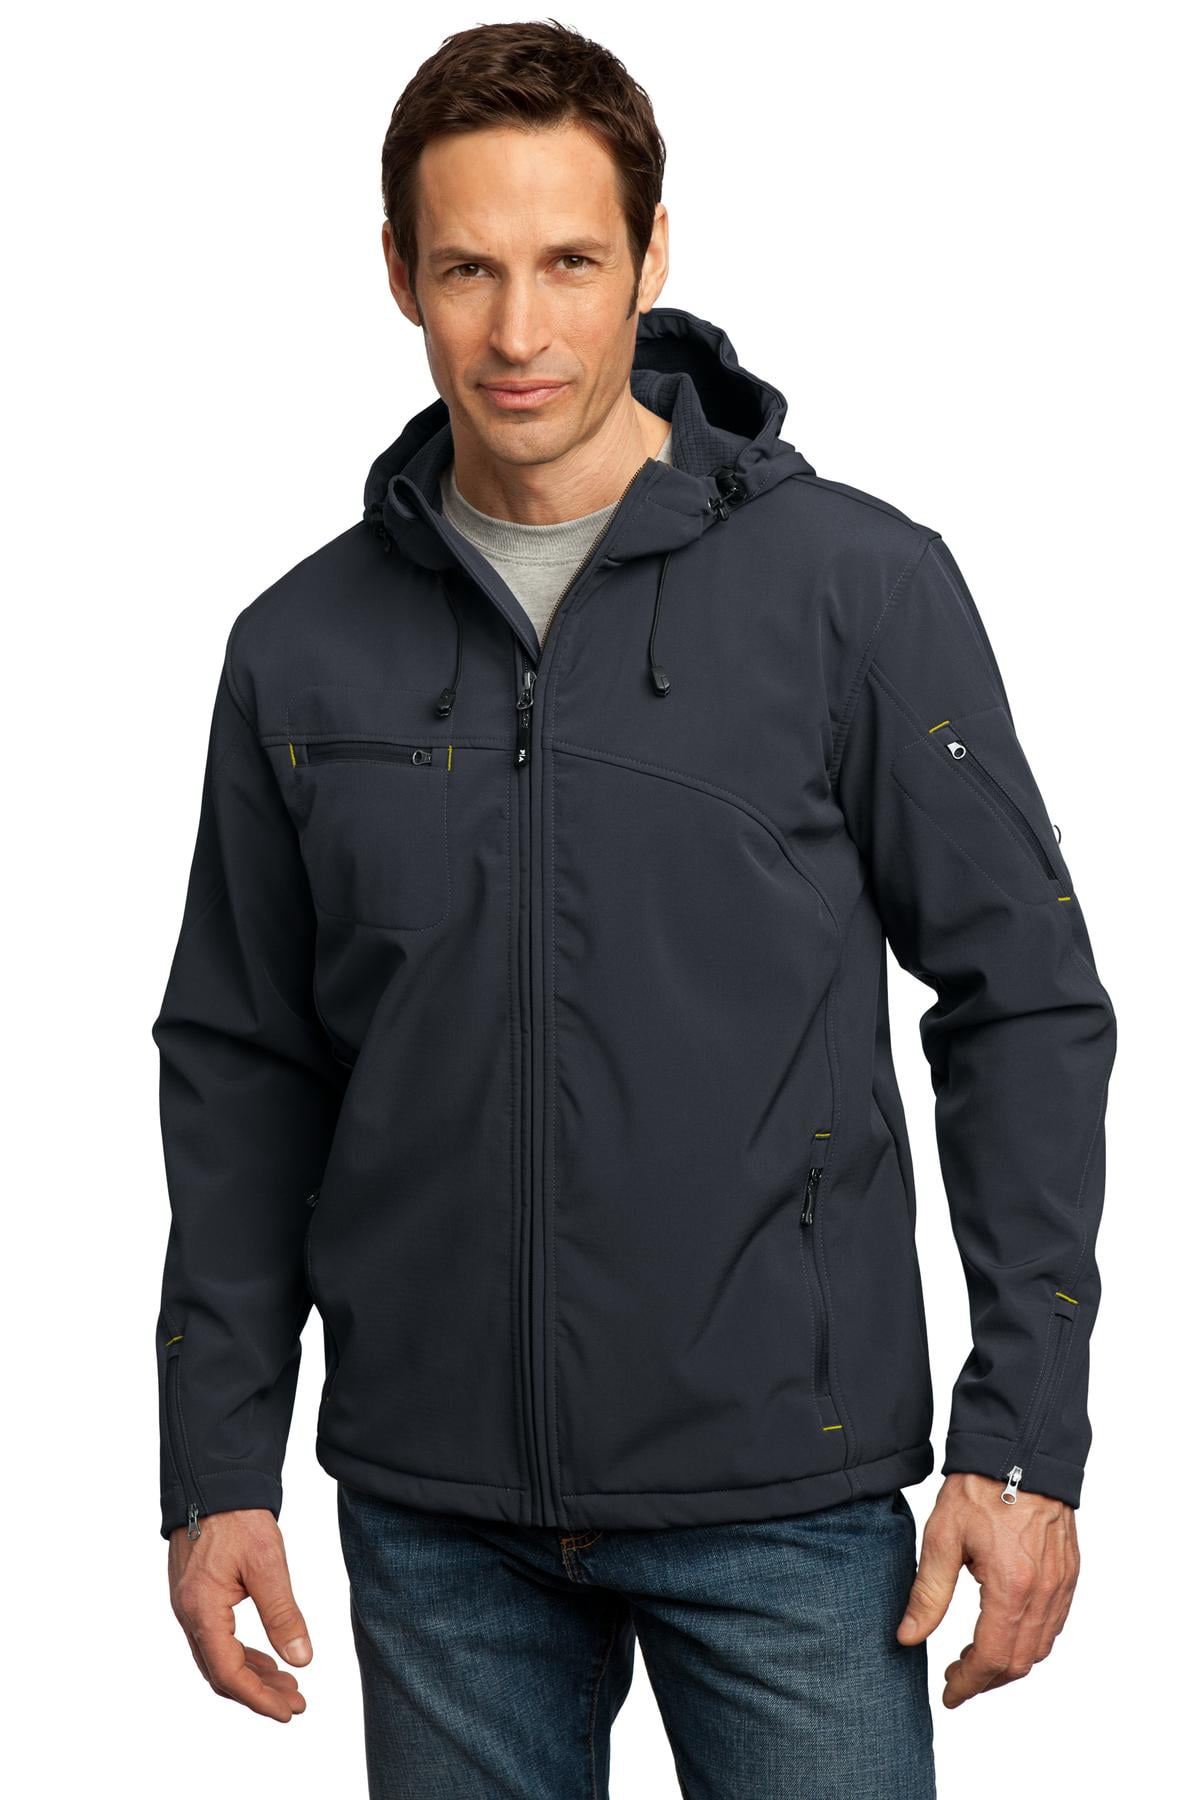 Port Authority J706 Coat Adult Textured Hooded Soft Shell Jacket ...